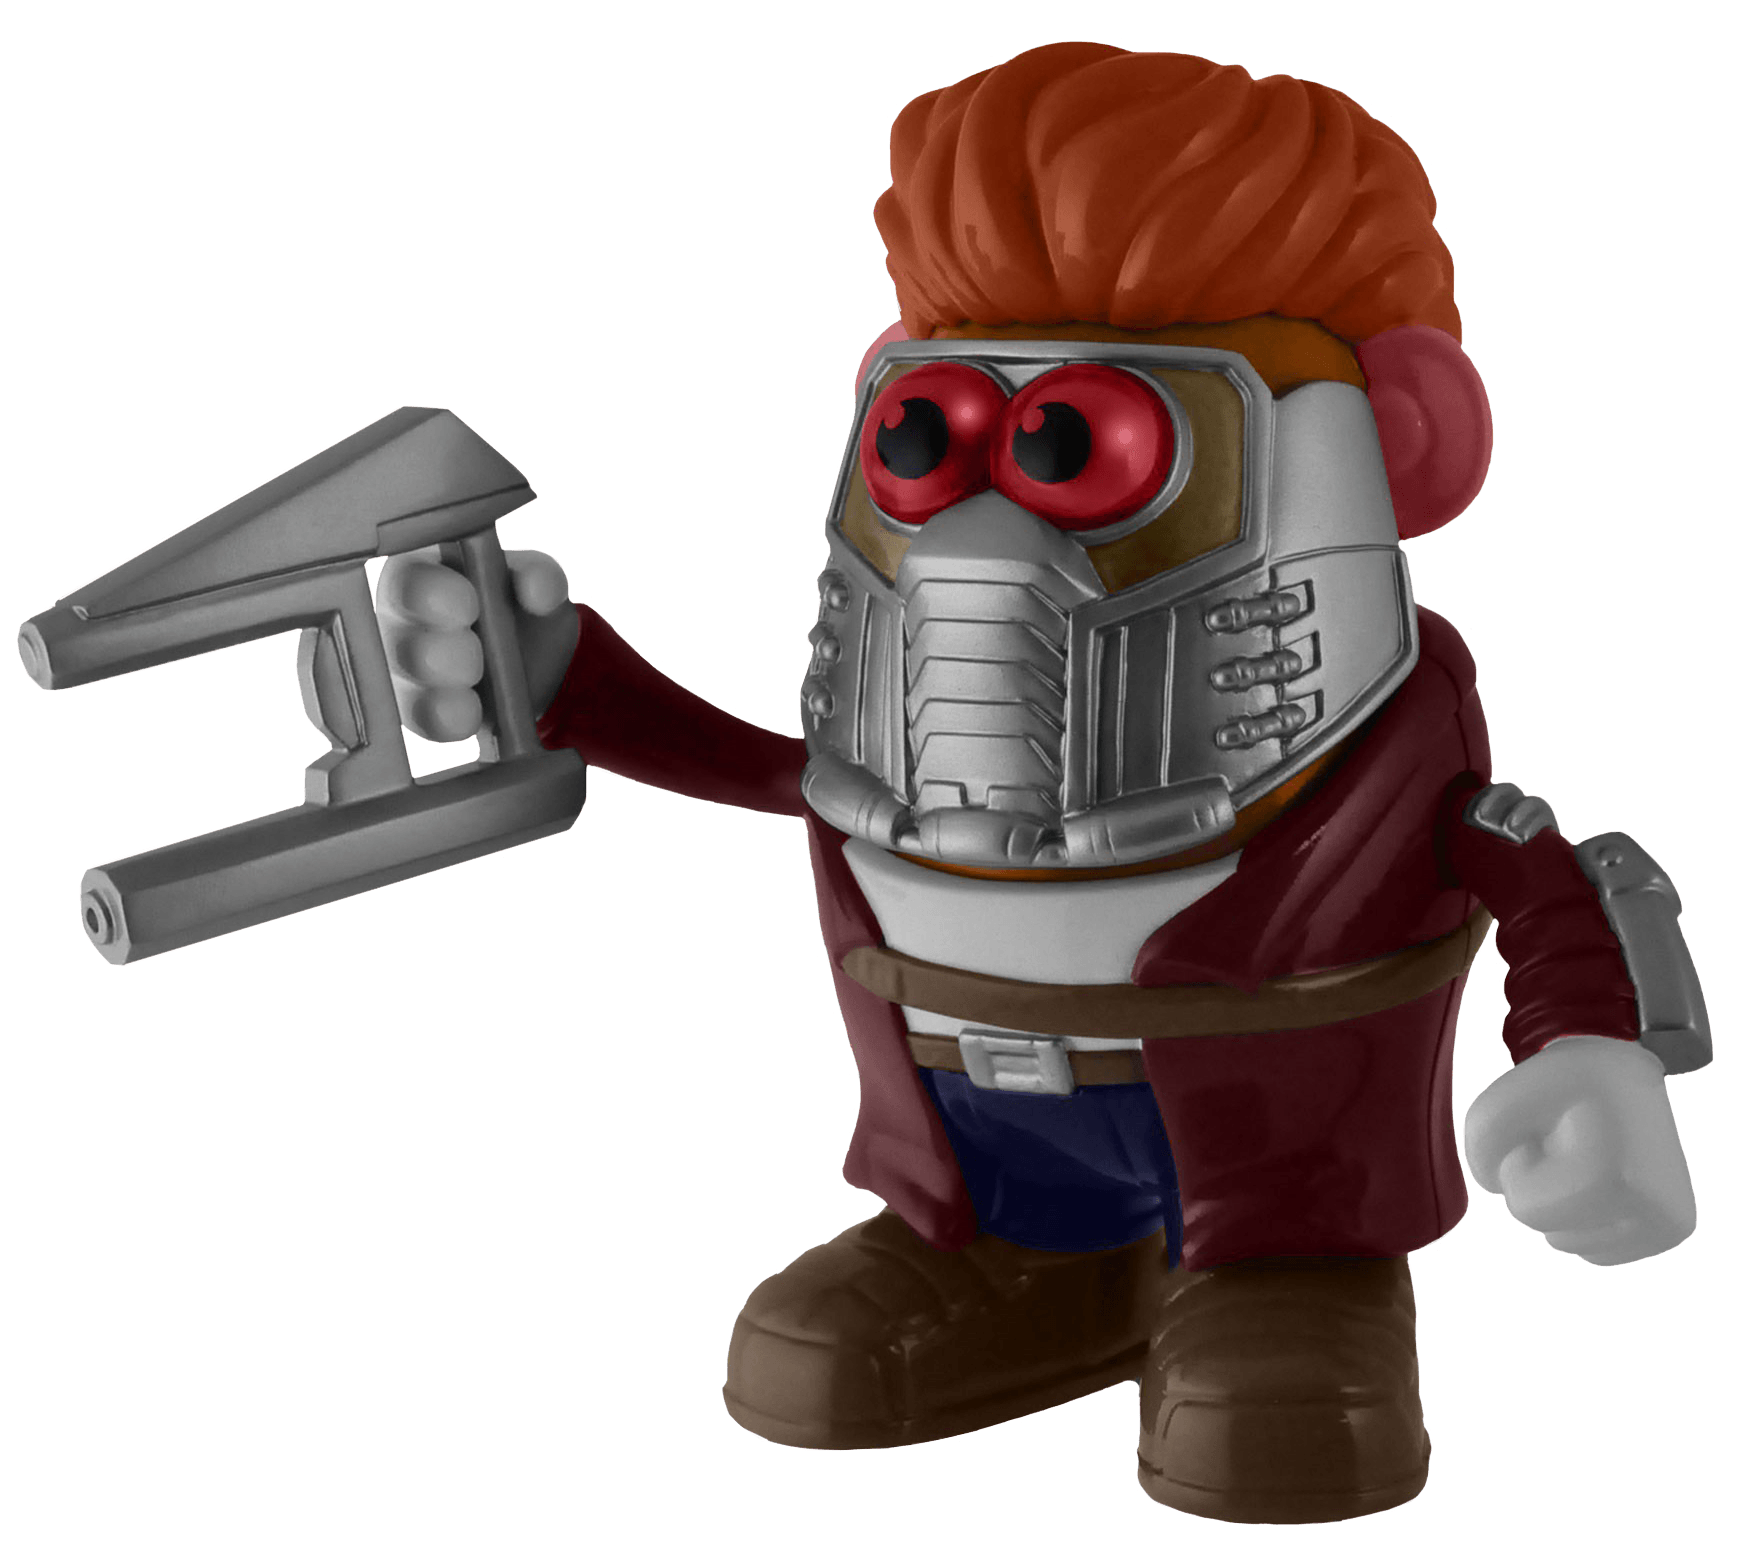 PPW02827 Guardians of the Galaxy - Star-Lord Mr. Potato Head - PPW Toys - Titan Pop Culture